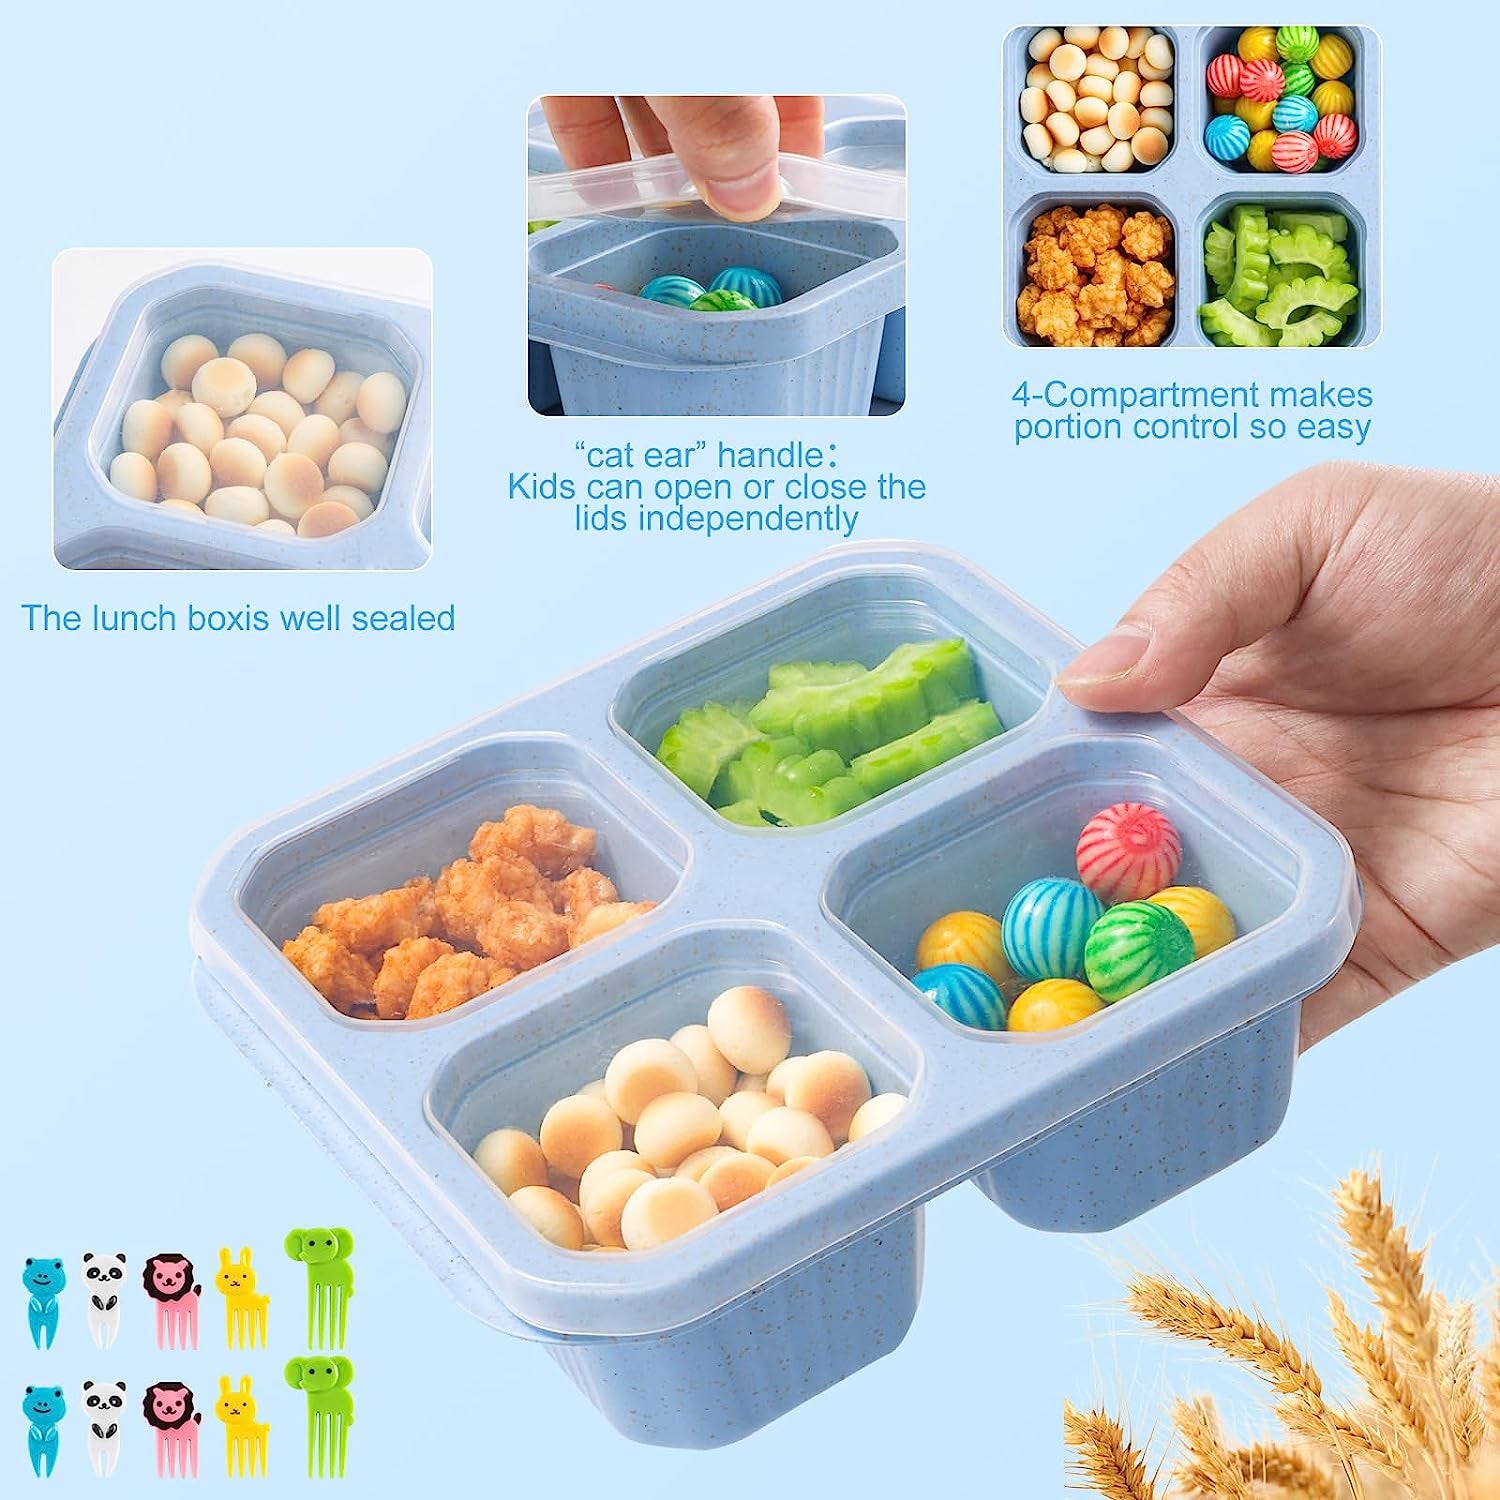 4-Pack Bento Lunch Boxes - BPA-Free, Reusable Food Storage Containers